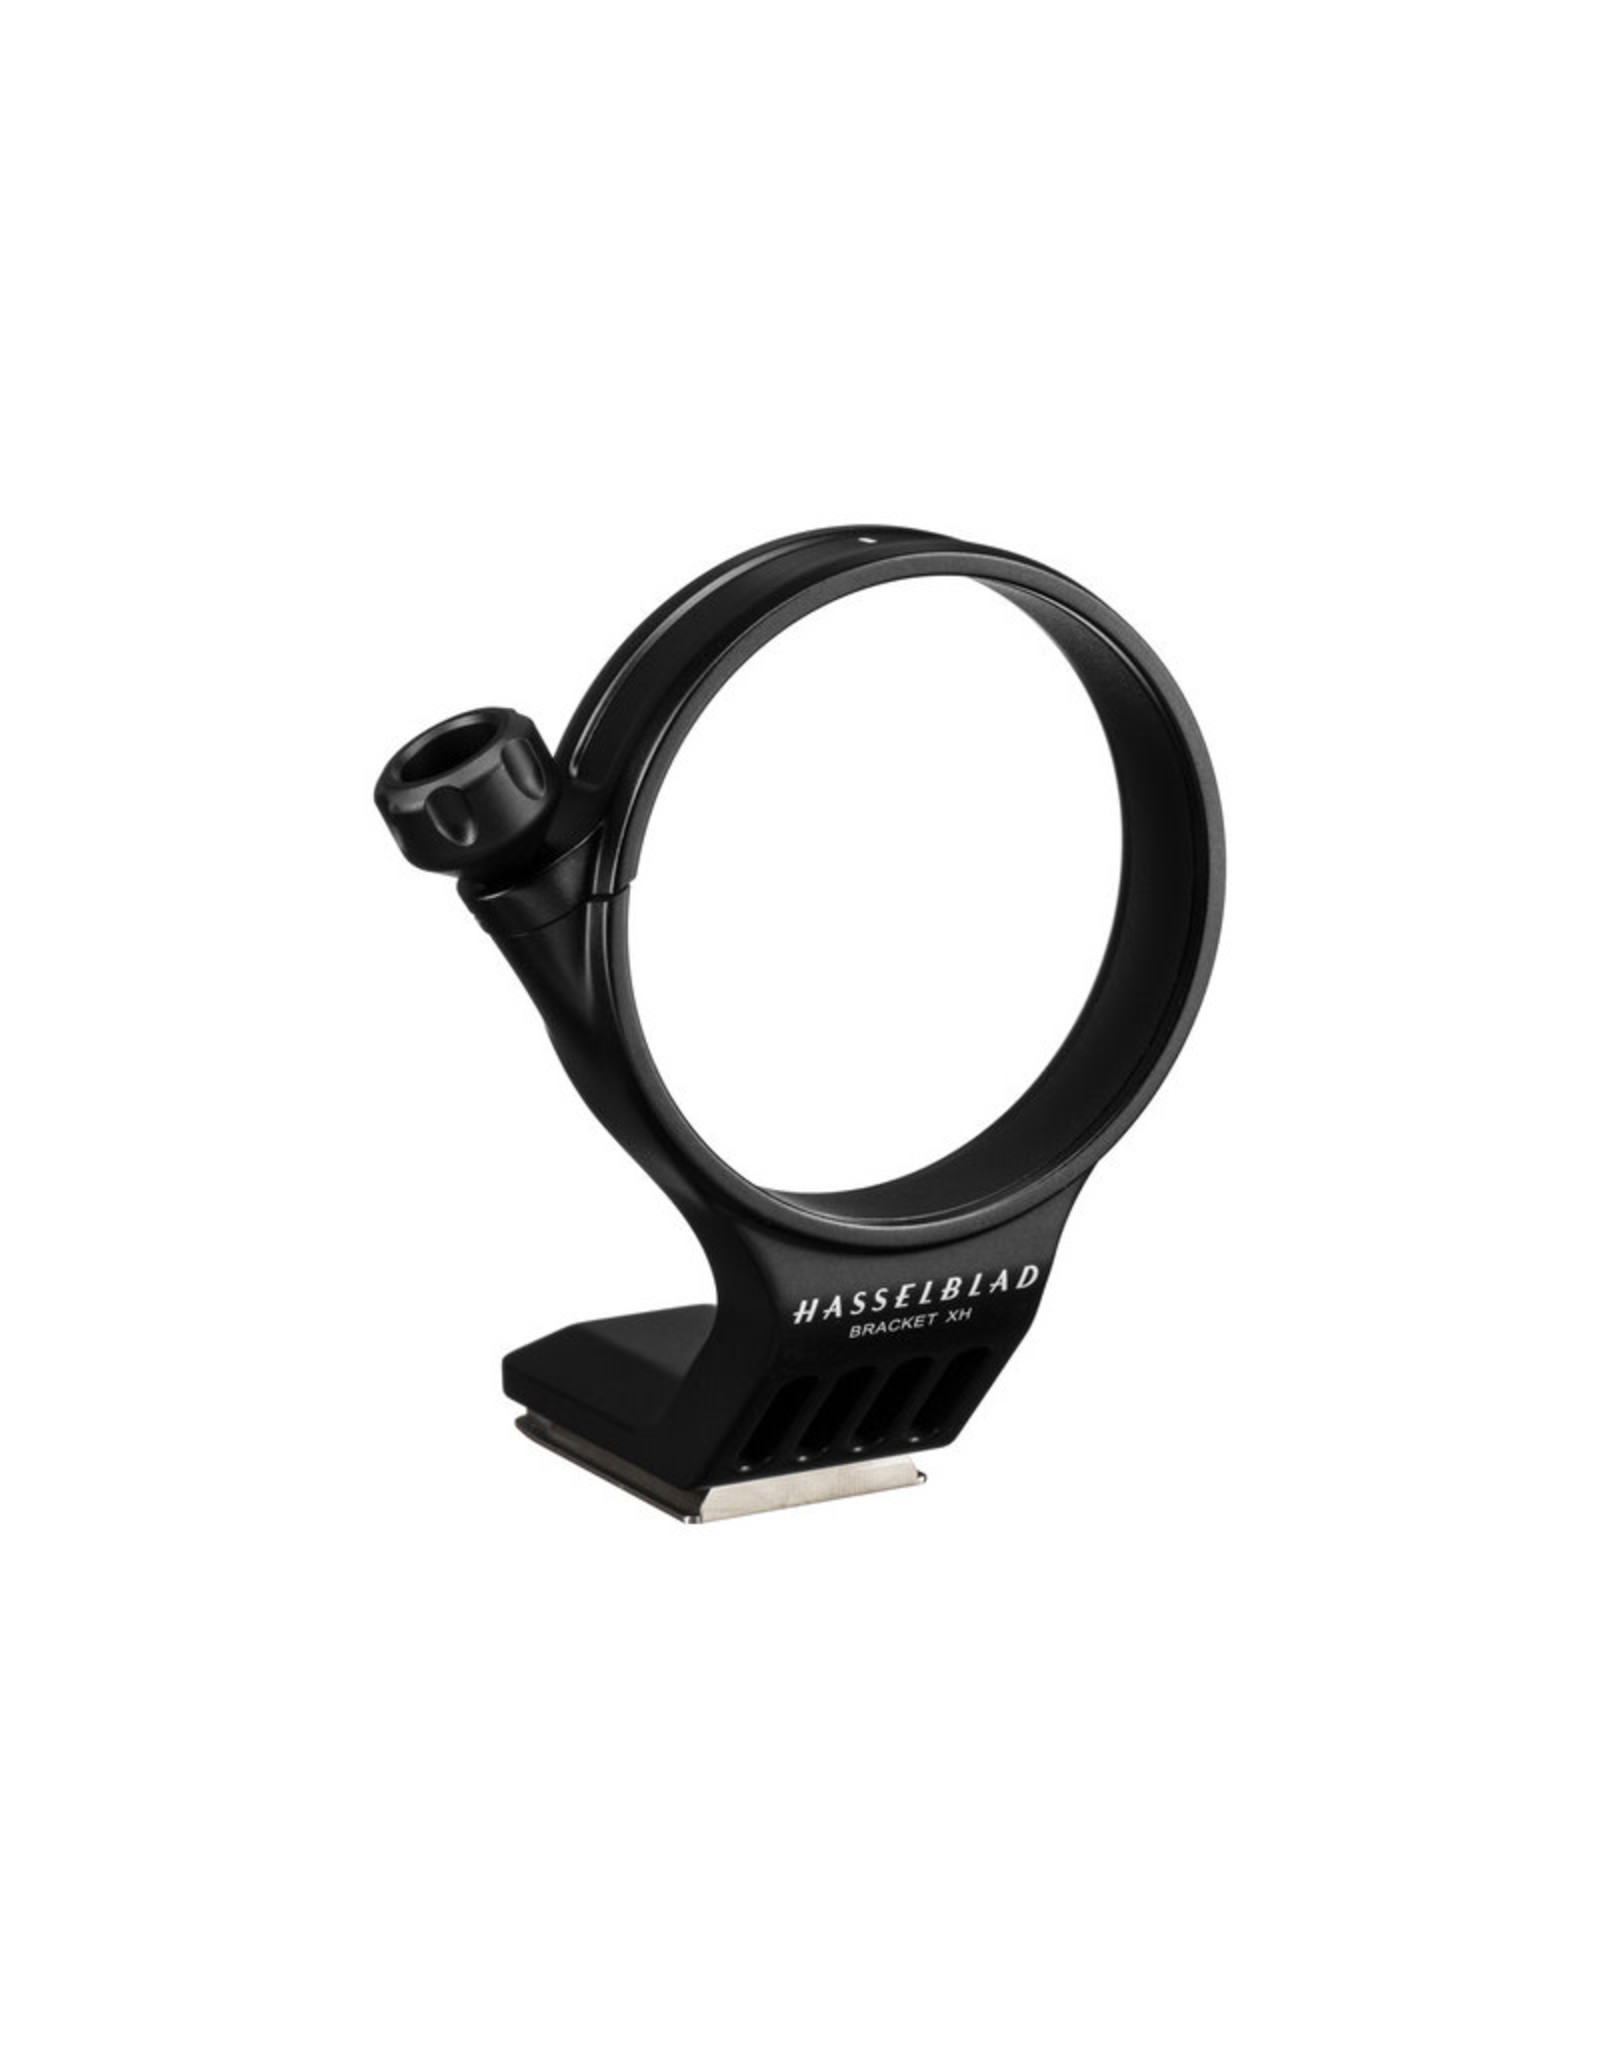 Hasselblad Hasselblad Tripod Mount Ring (75mm) Compatible with XH Lens Adapter